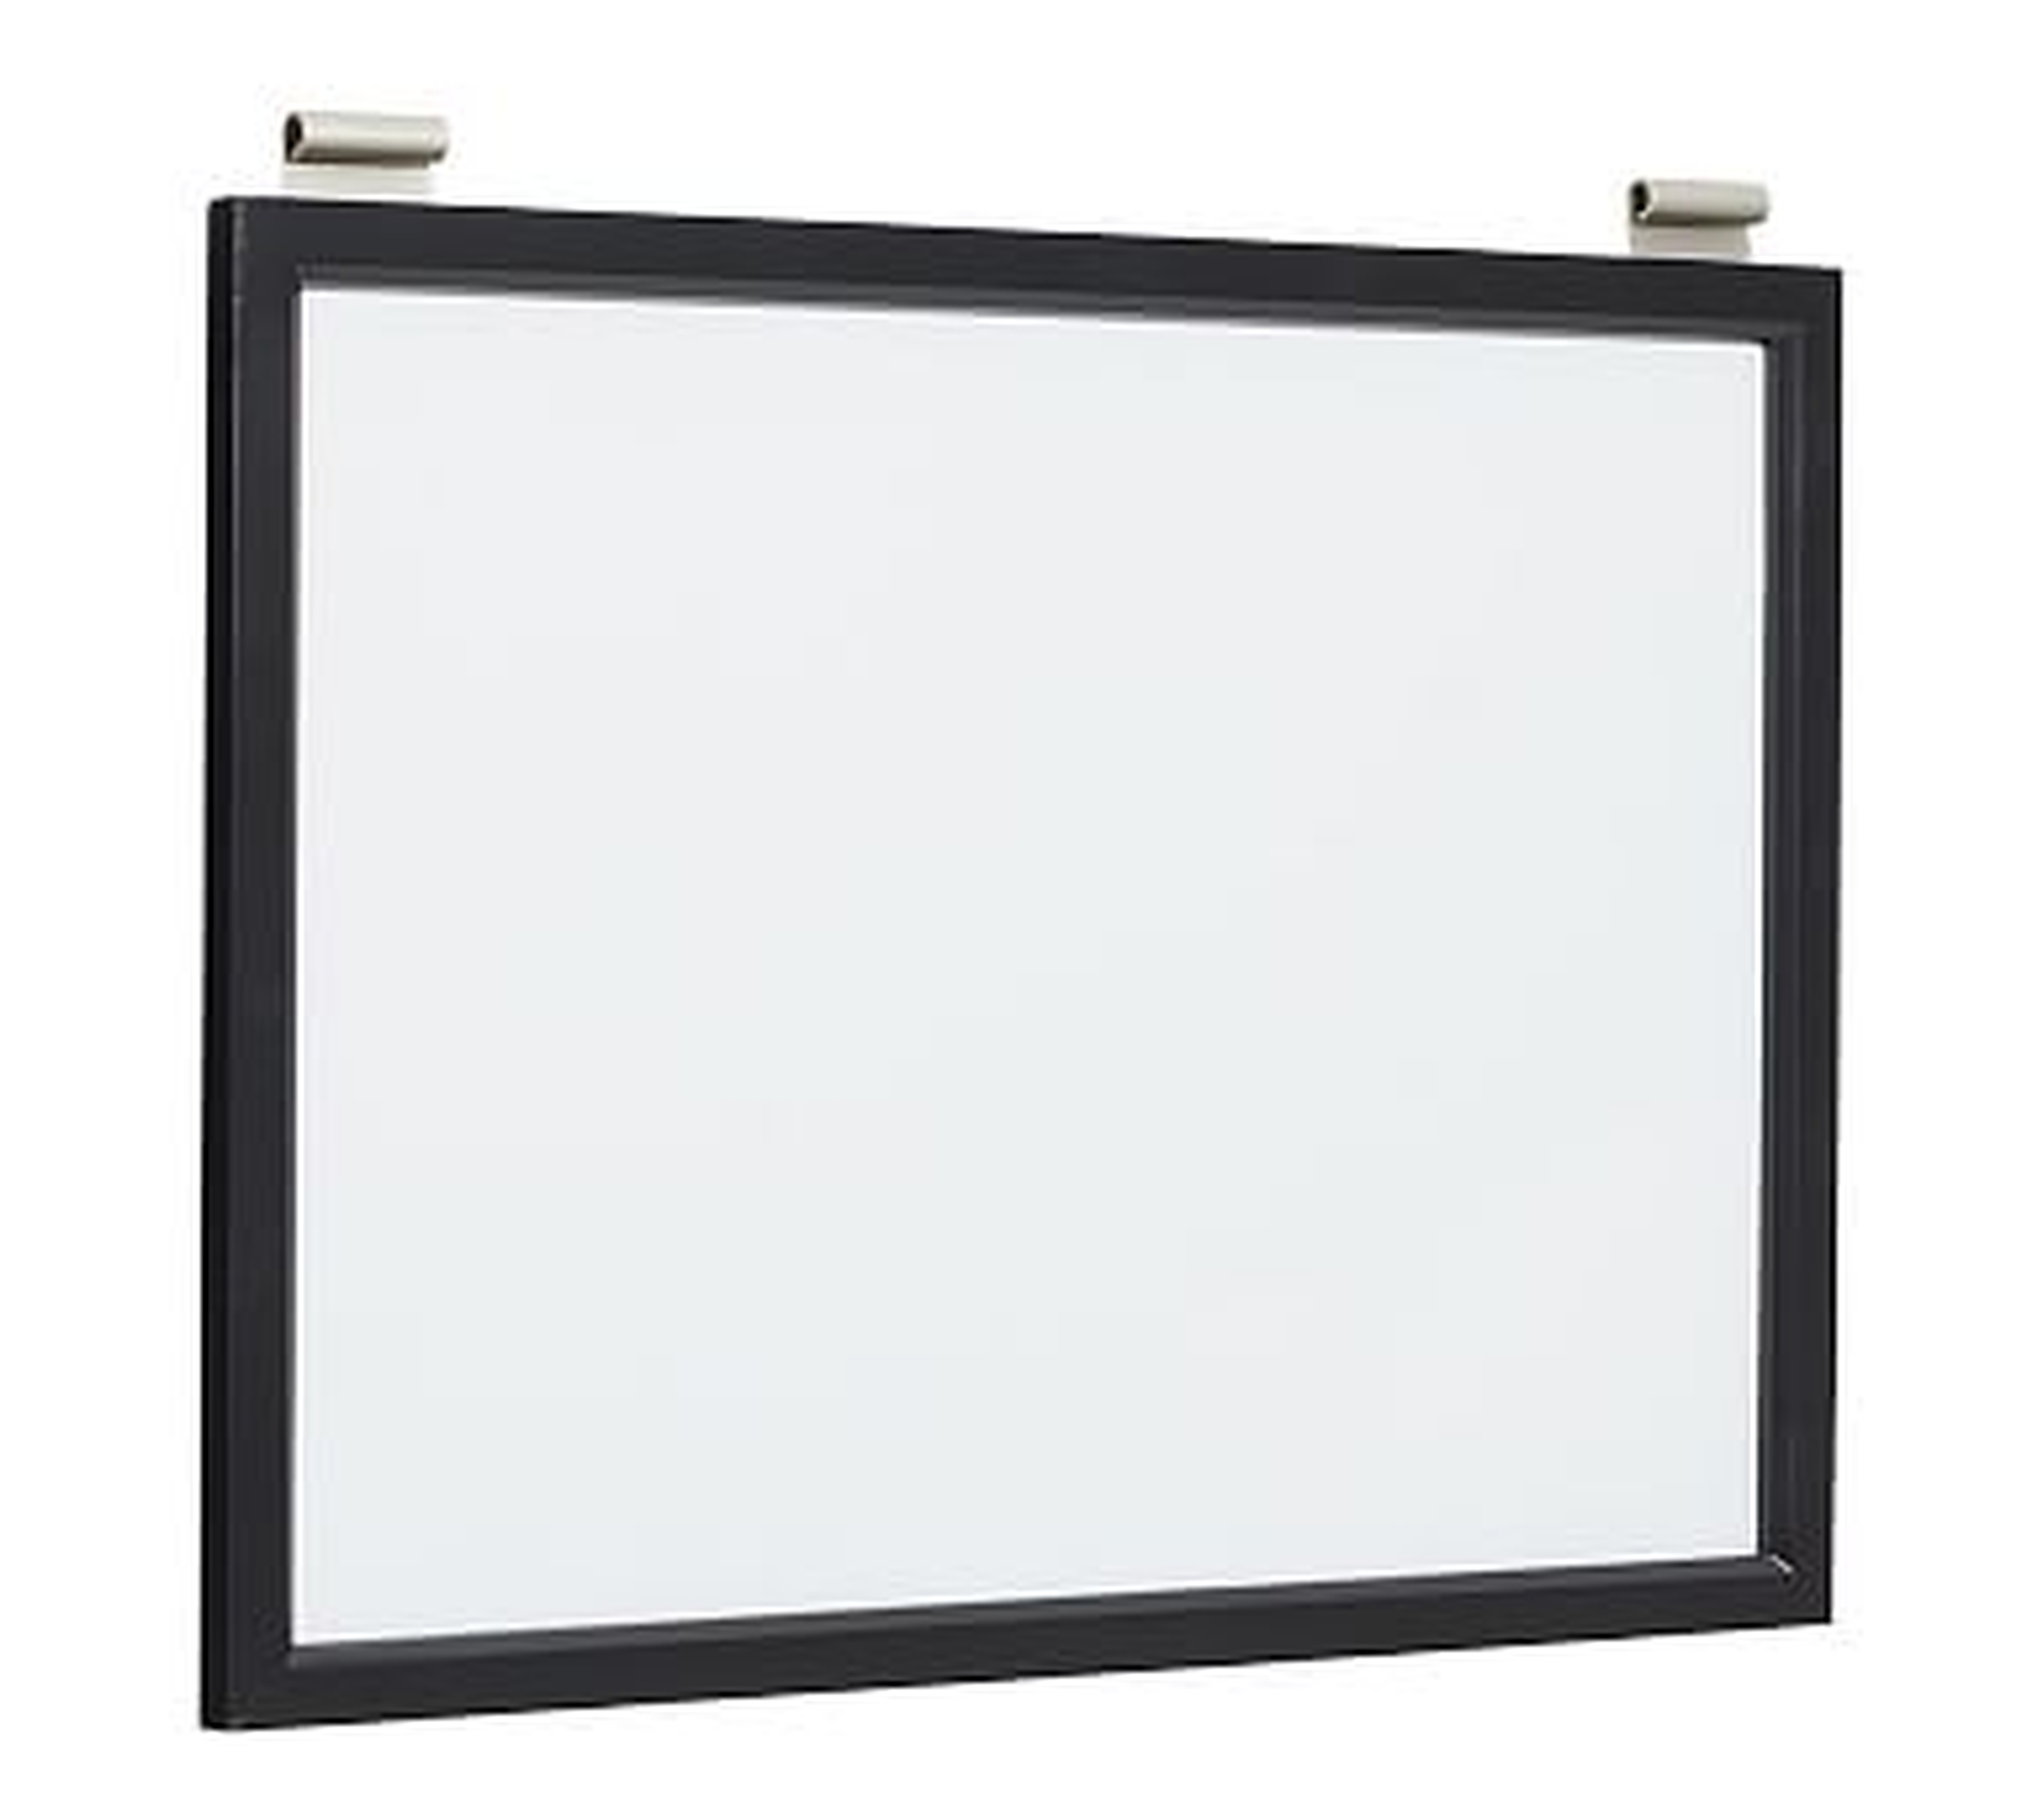 Daily System Magnetic Whiteboard, Black - Pottery Barn